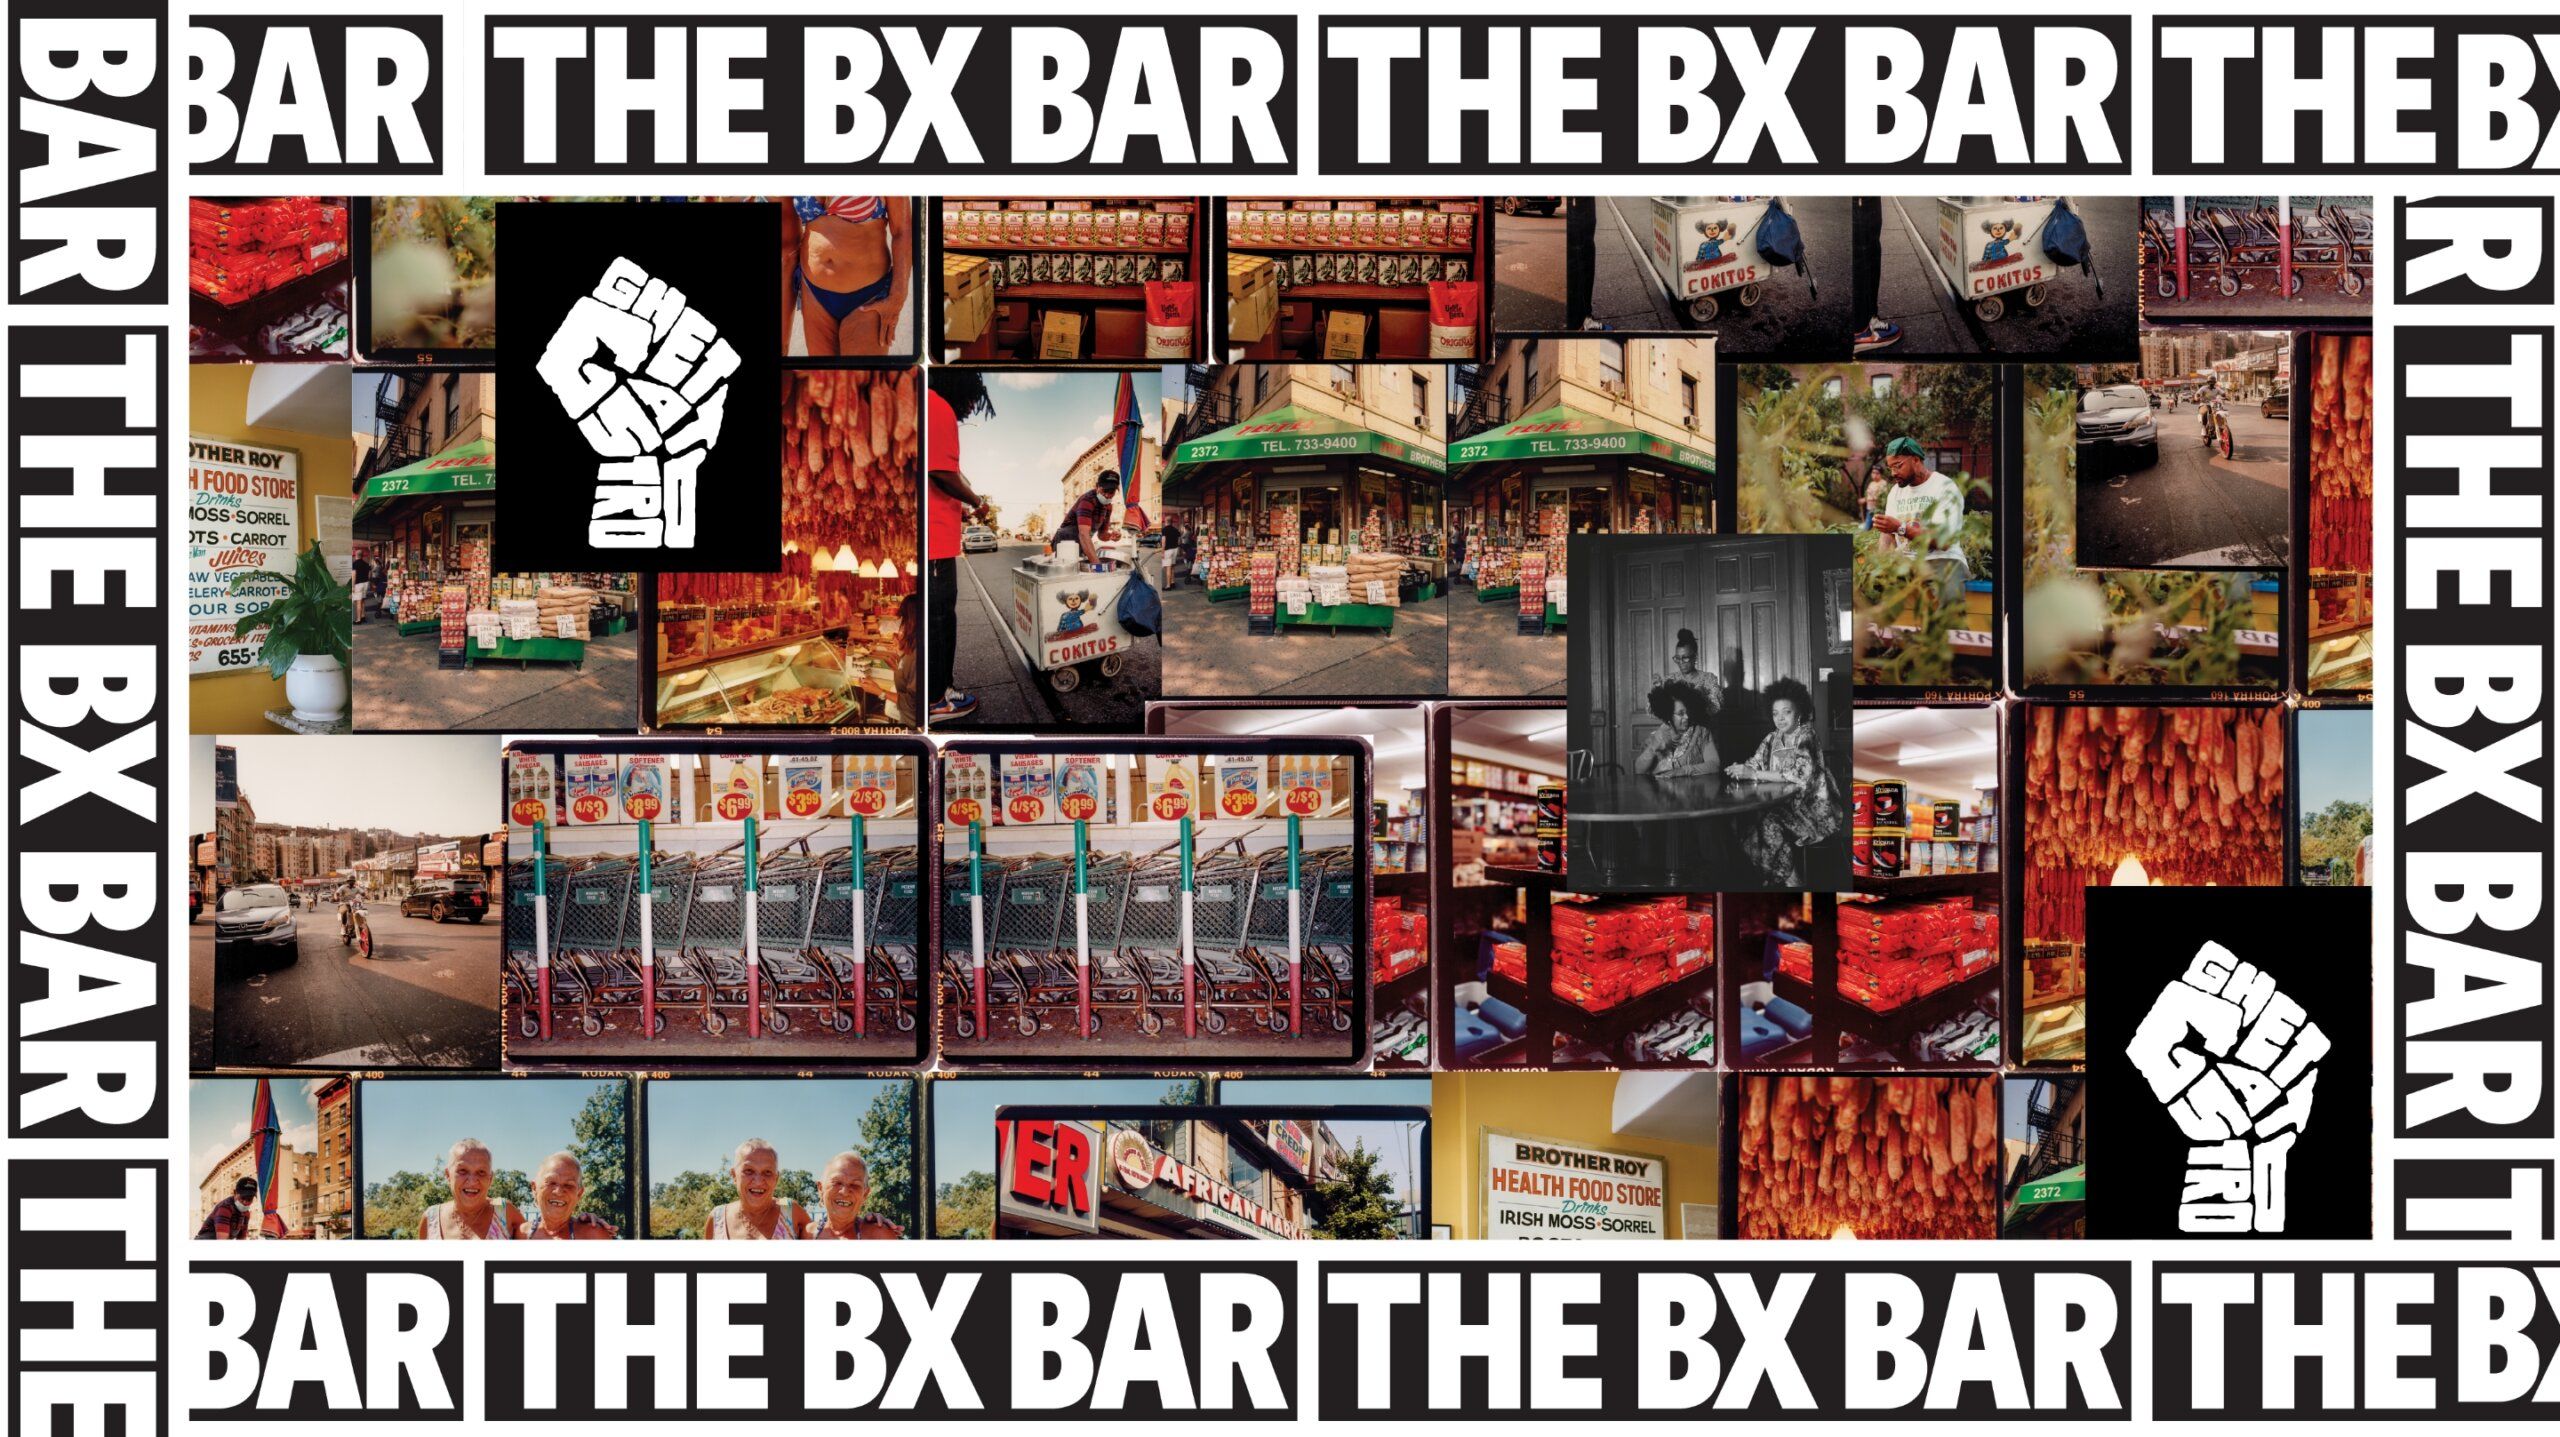 The BX Bar. Many images from the book showing the Bronx neighboorhood with various grocery stores and food vendors